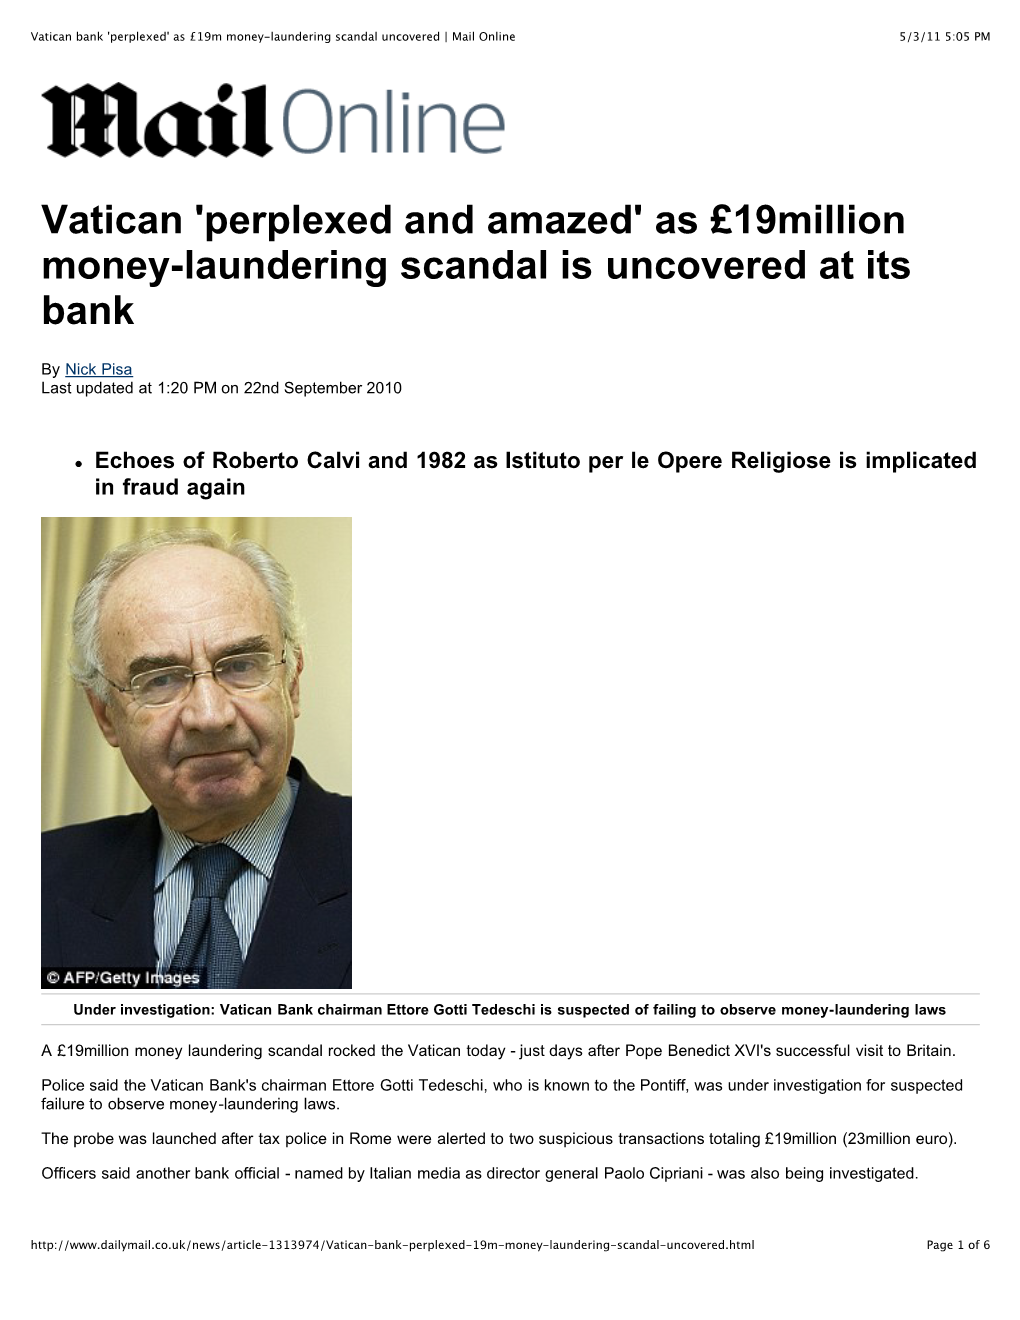 Vatican Bank 'Perplexed' As £19M Money-Laundering Scandal Uncovered | Mail Online 5/3/11 5:05 PM